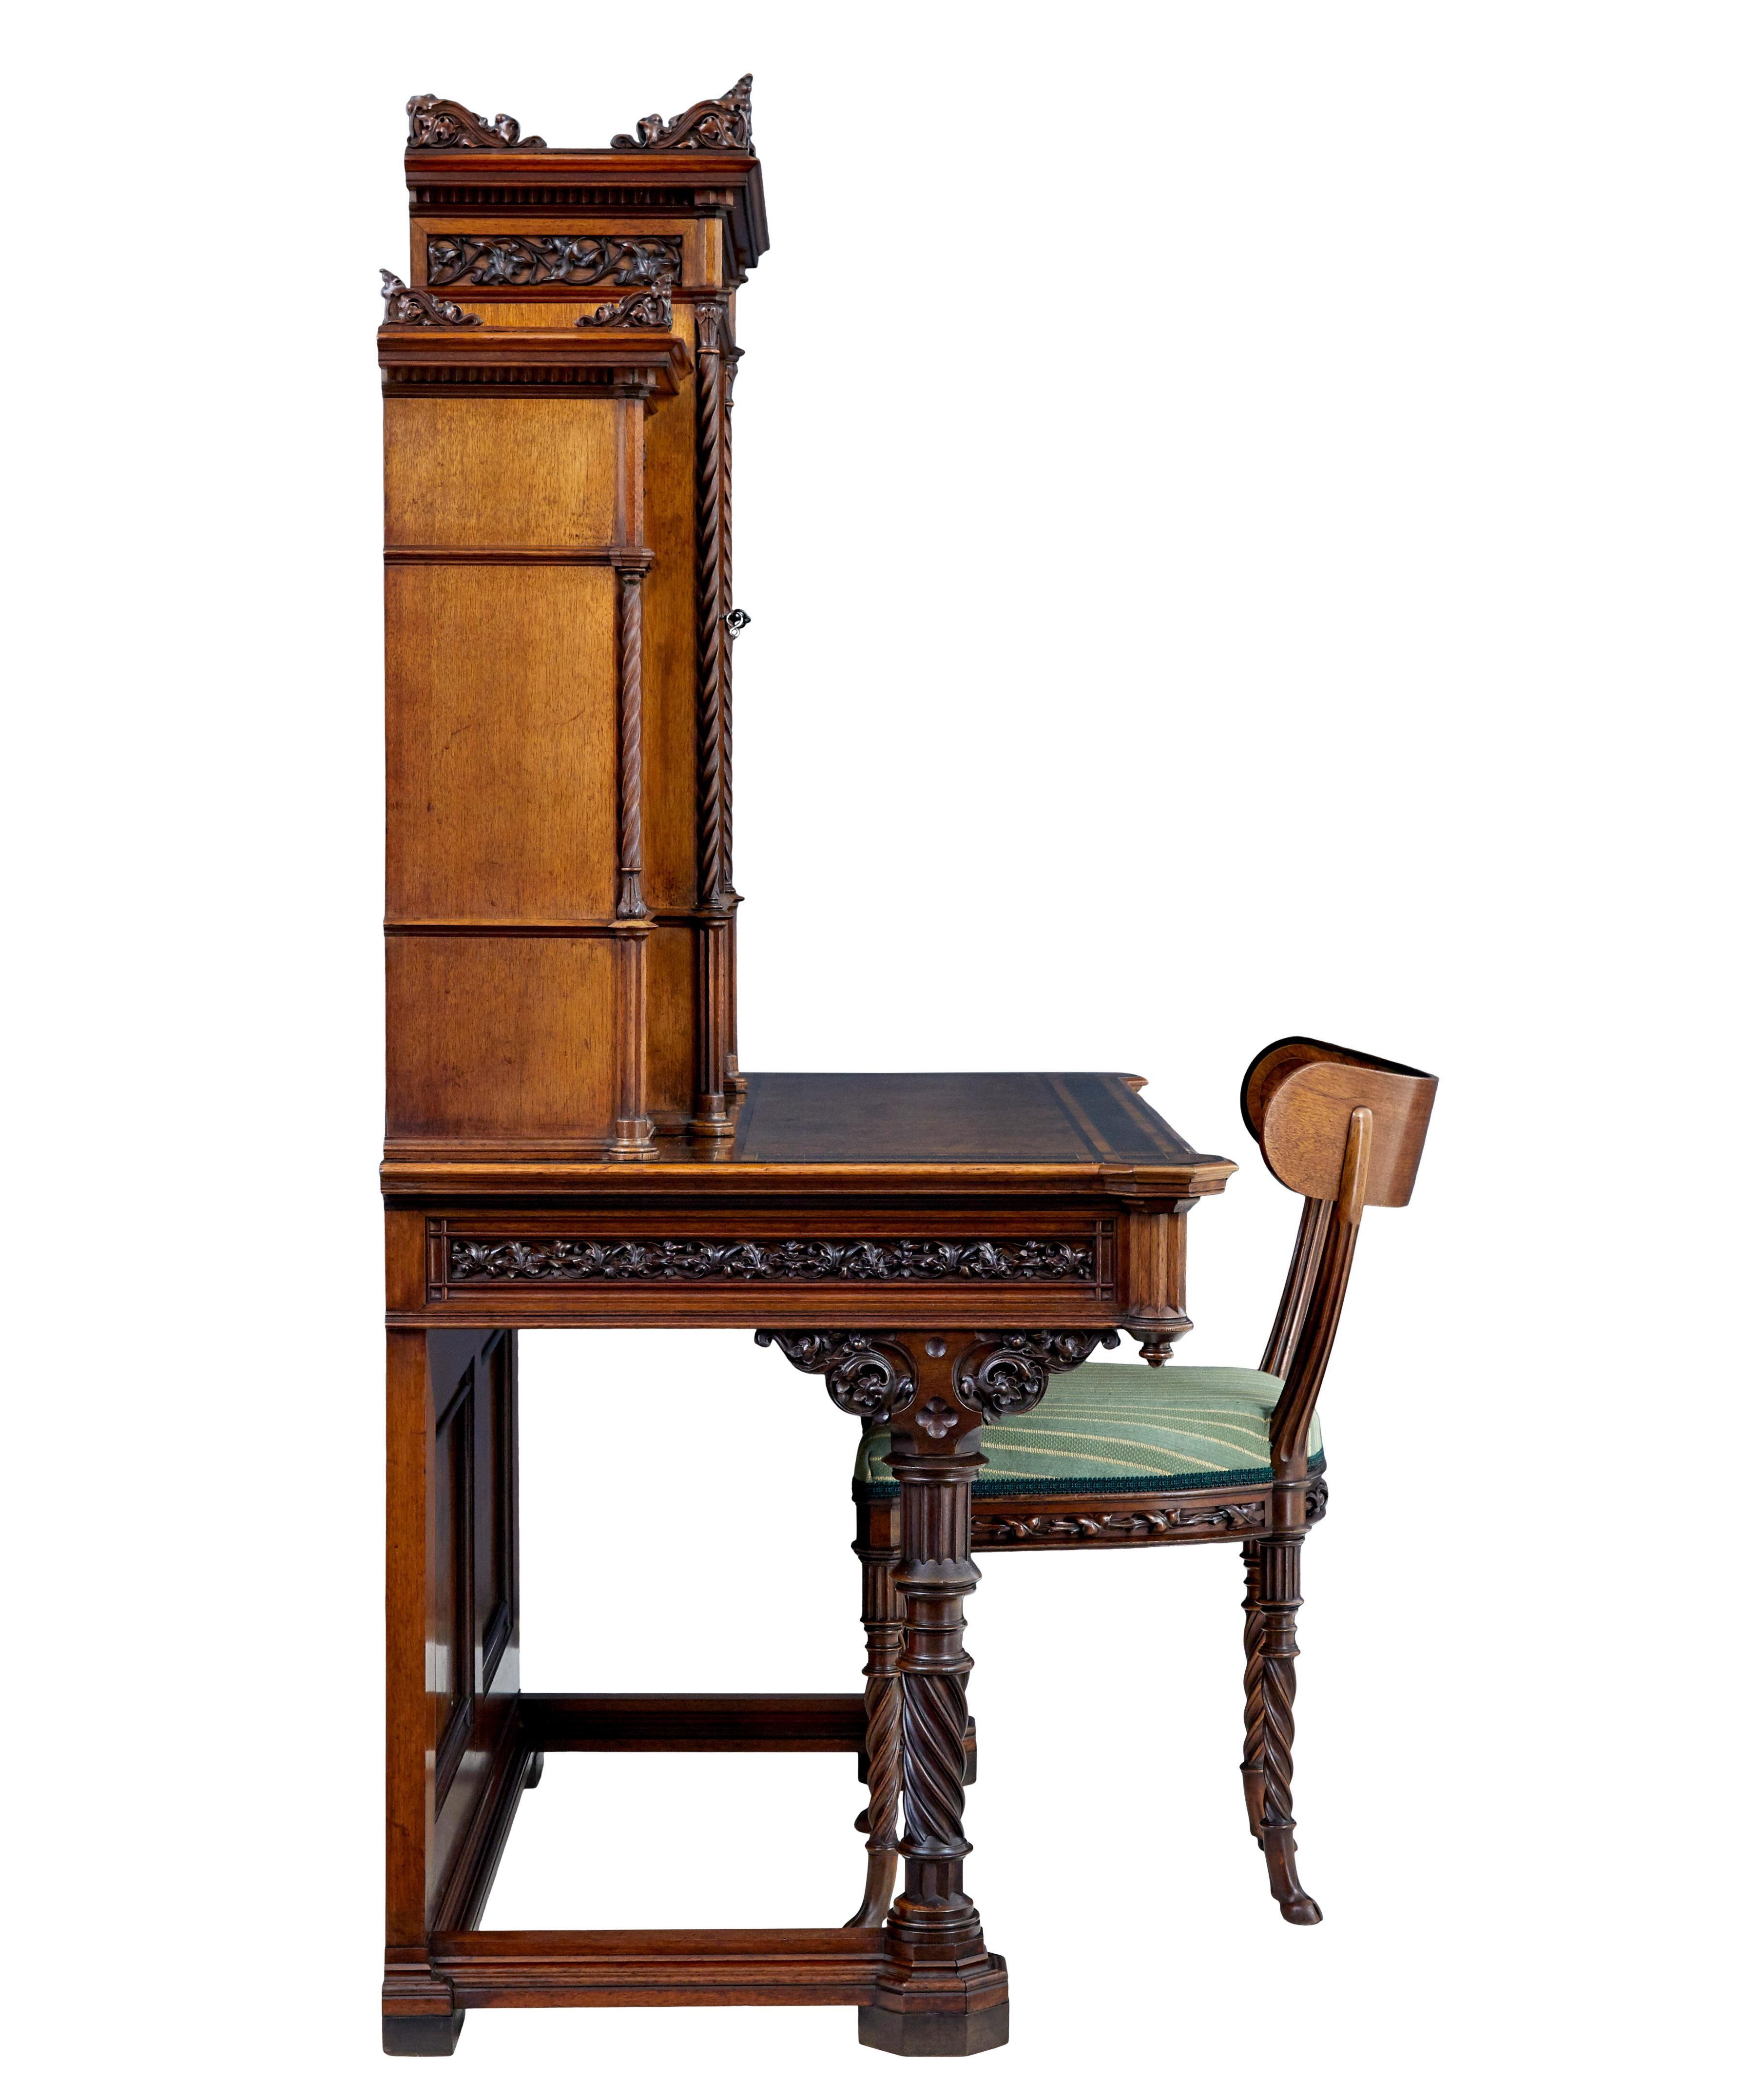 Eclectic 19th century carved walnut desk and chair In Good Condition For Sale In Debenham, Suffolk